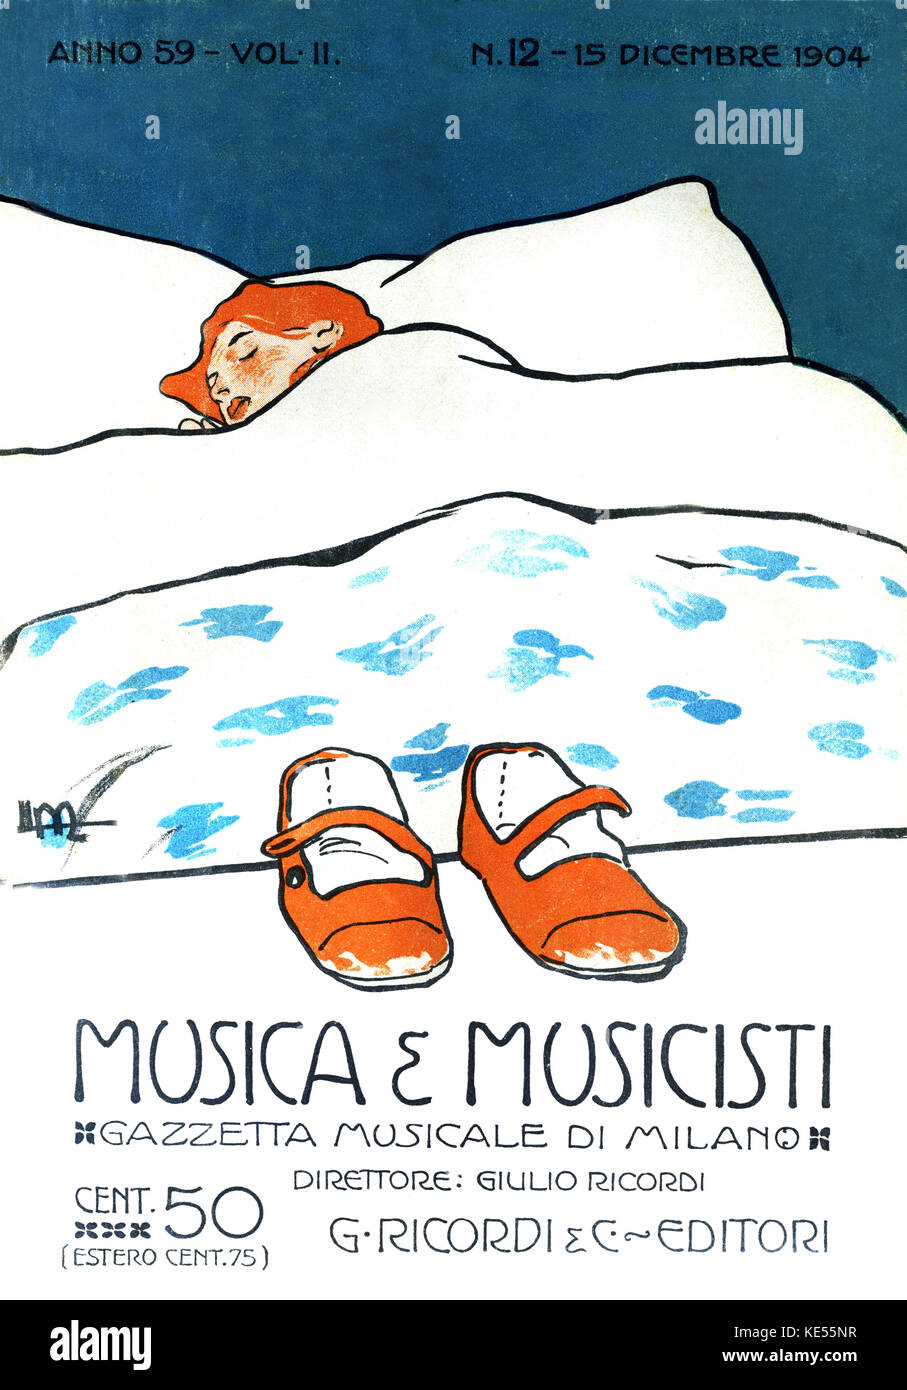 Woman asleep with red shoes. Cover of  Italian music magazine, ' Musica e Musicisti ' , the musical gazette of Milan, 1904.  Art nouveau style. Stock Photo